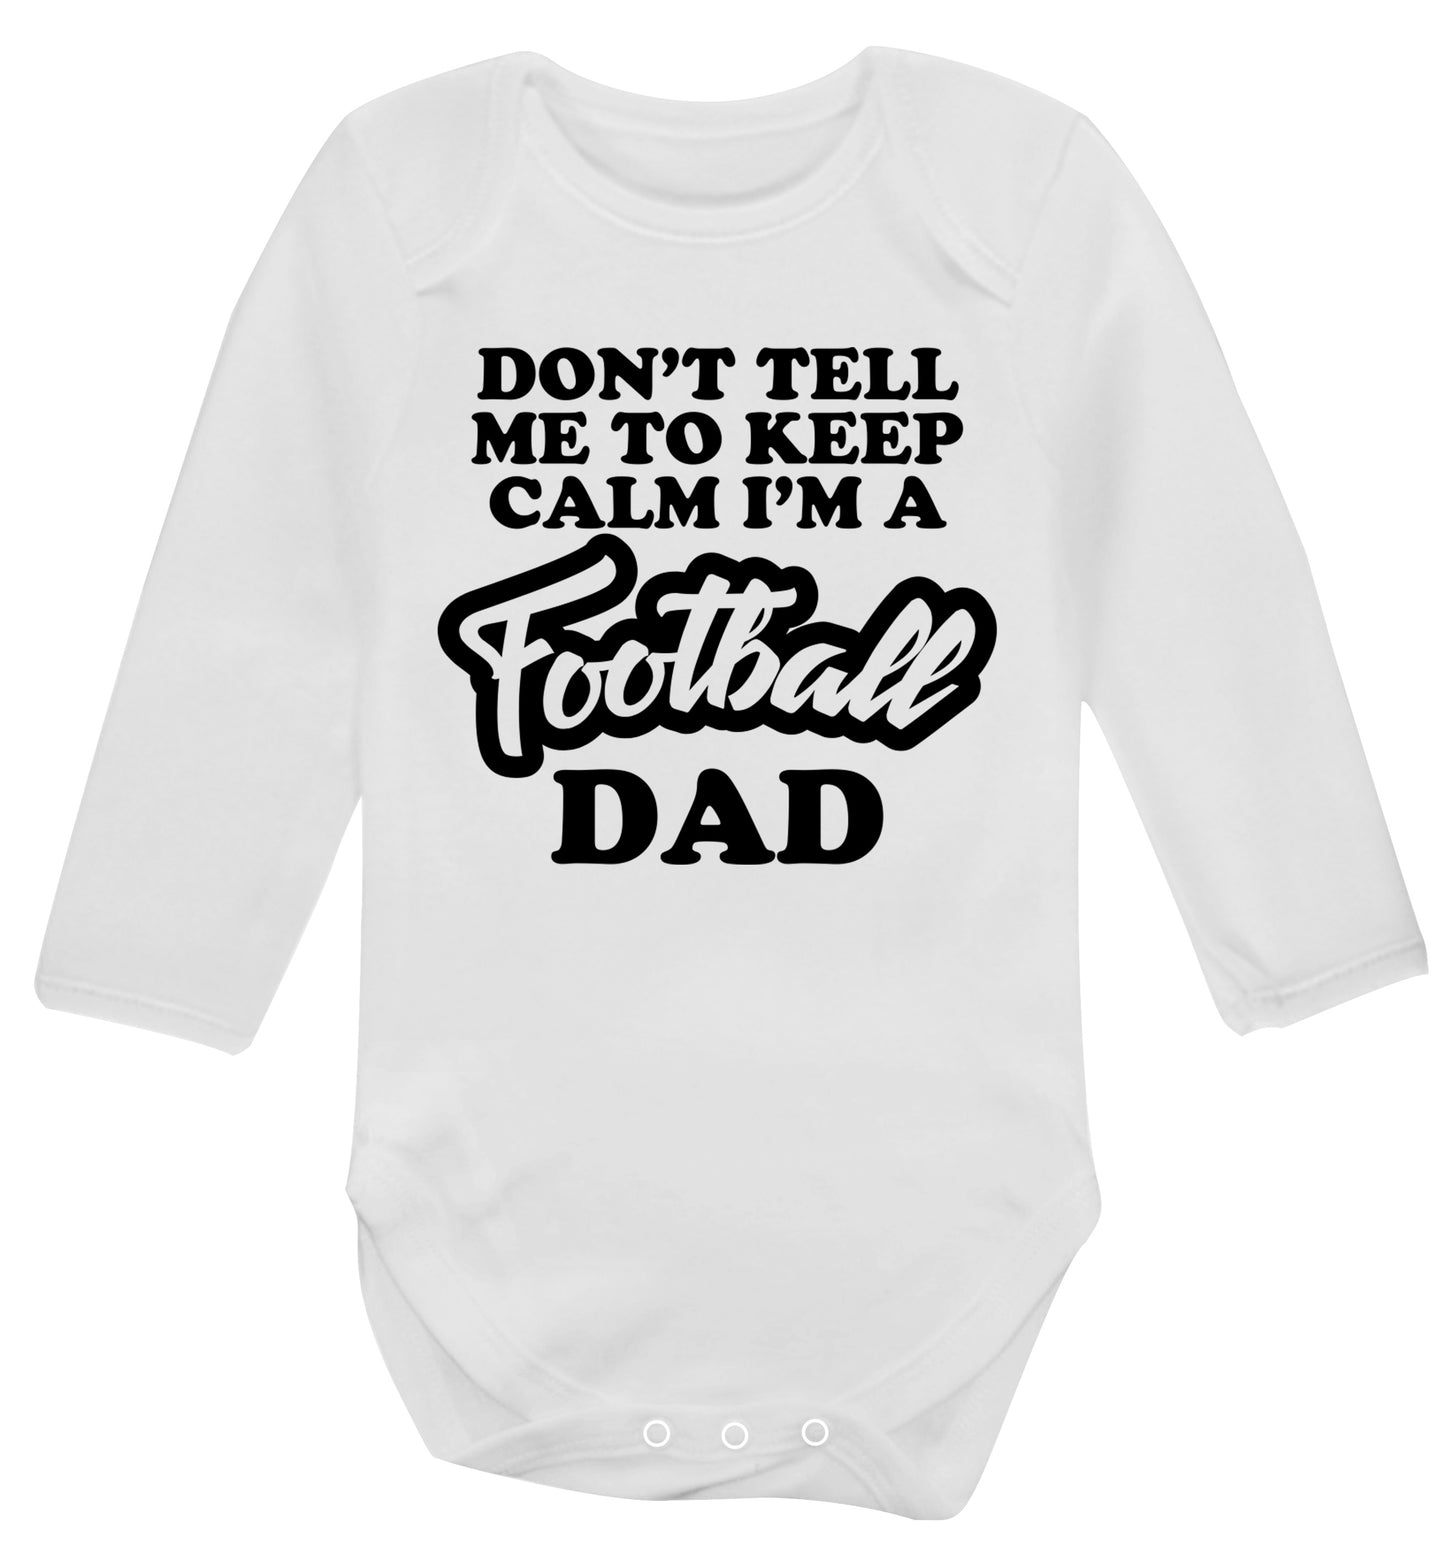 Don't tell me to keep calm I'm a football dad Baby Vest long sleeved white 6-12 months